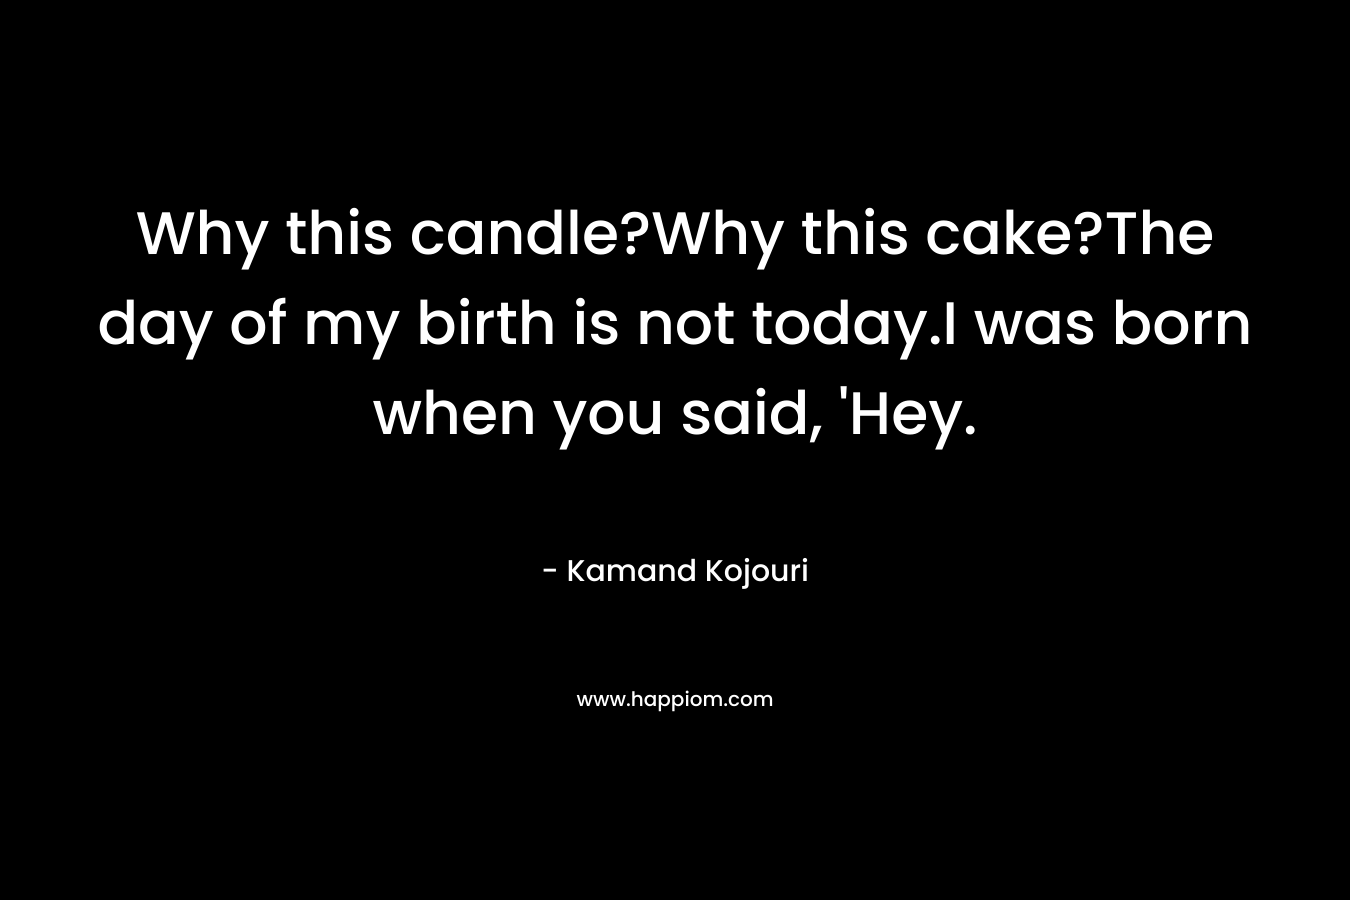 Why this candle?Why this cake?The day of my birth is not today.I was born when you said, 'Hey.